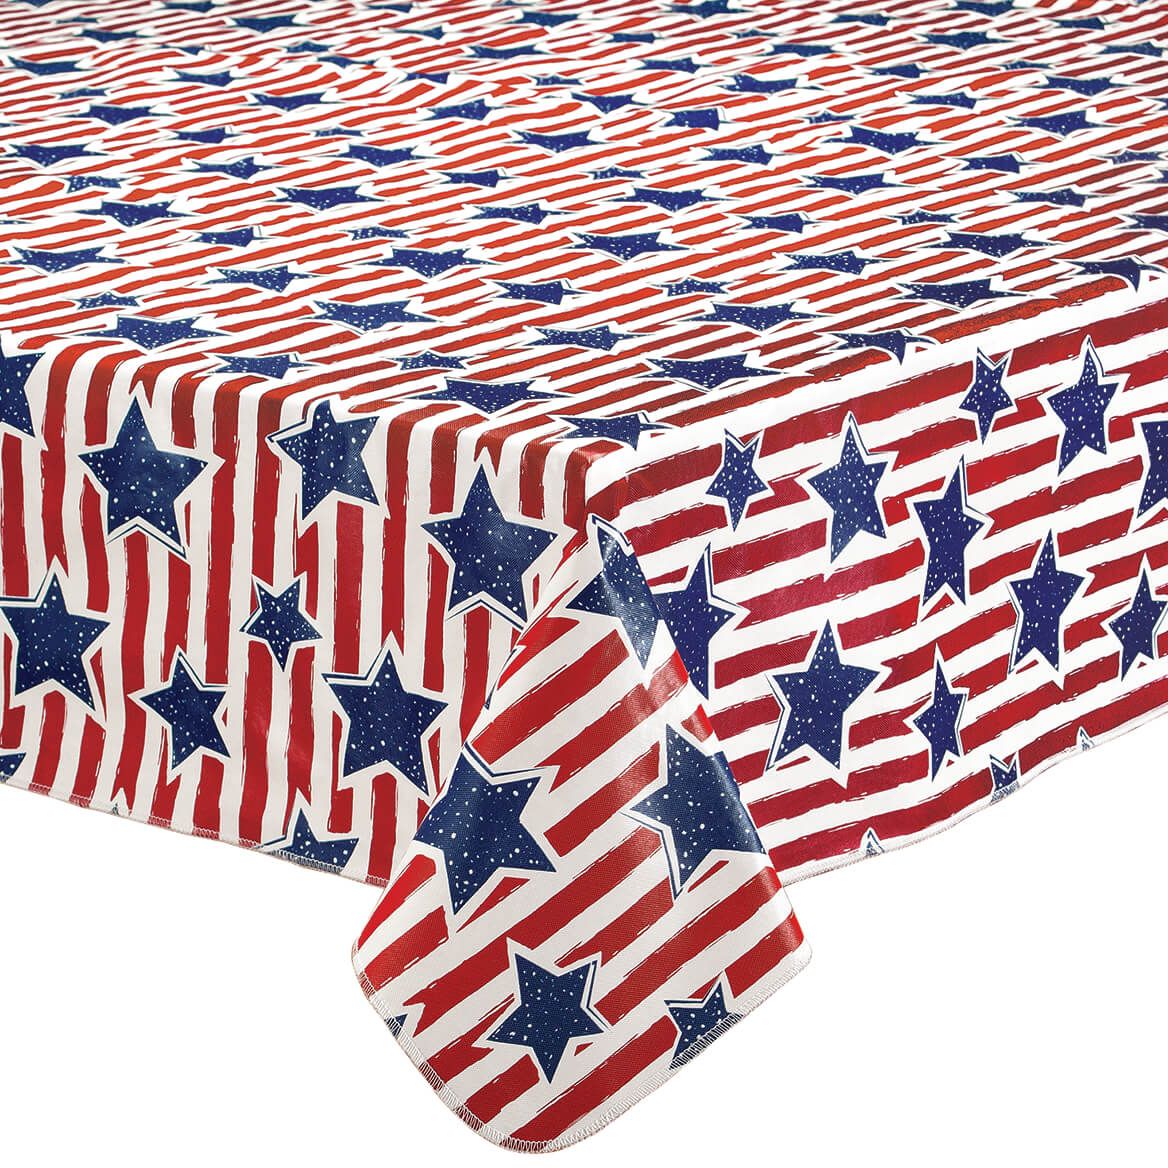 Oh My Stars Vinyl Table Cover by Chef's Pride + '-' + 373256